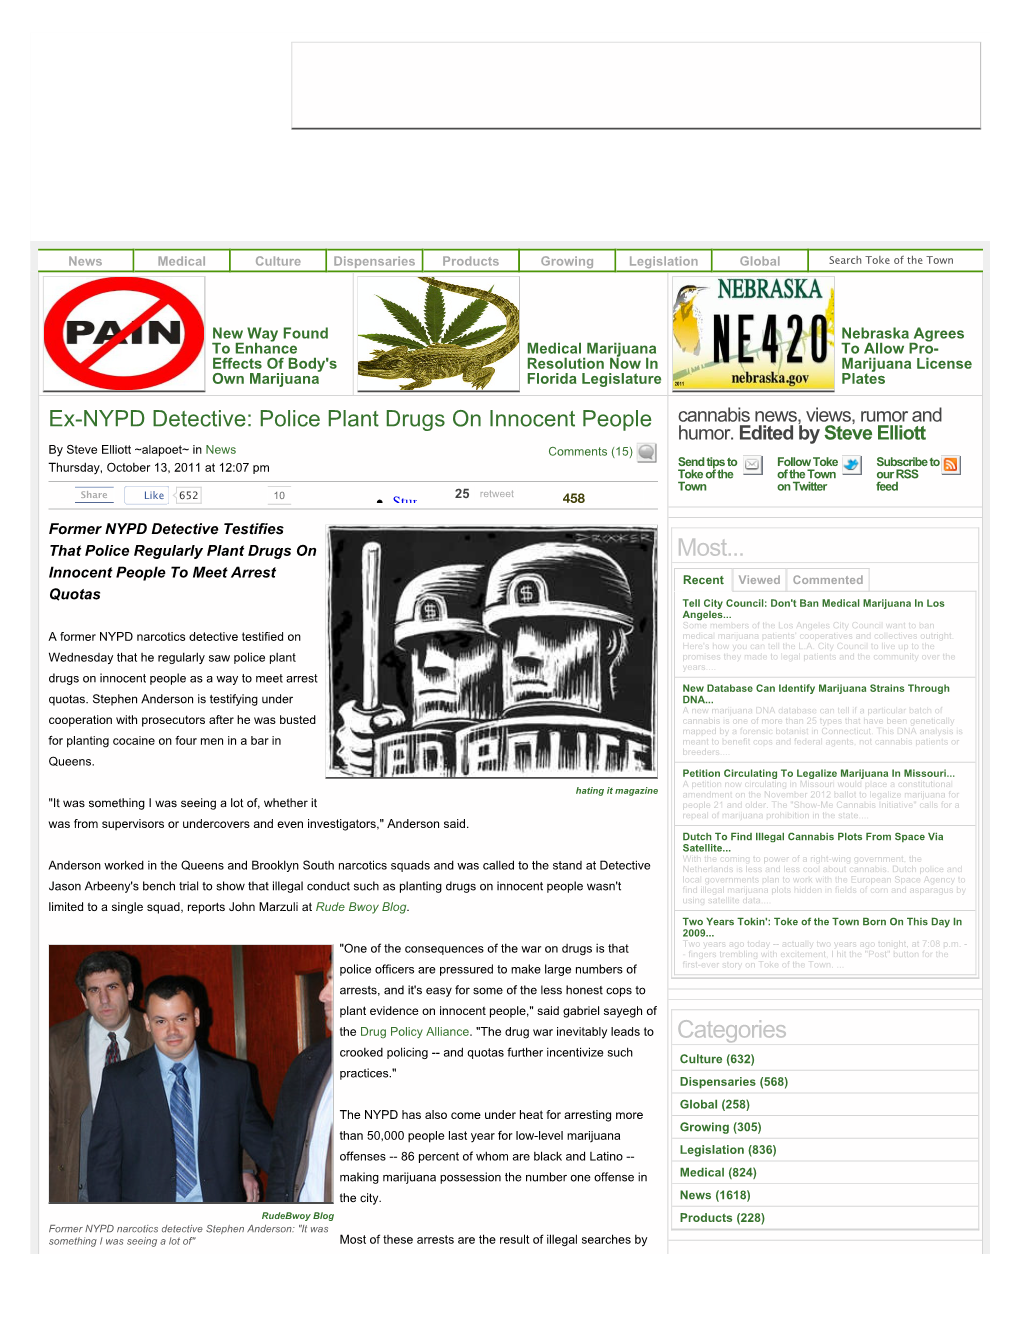 Ex-NYPD Detective: Police Plant Drugs on Innocent People Cannabis News, Views, Rumor and Humor